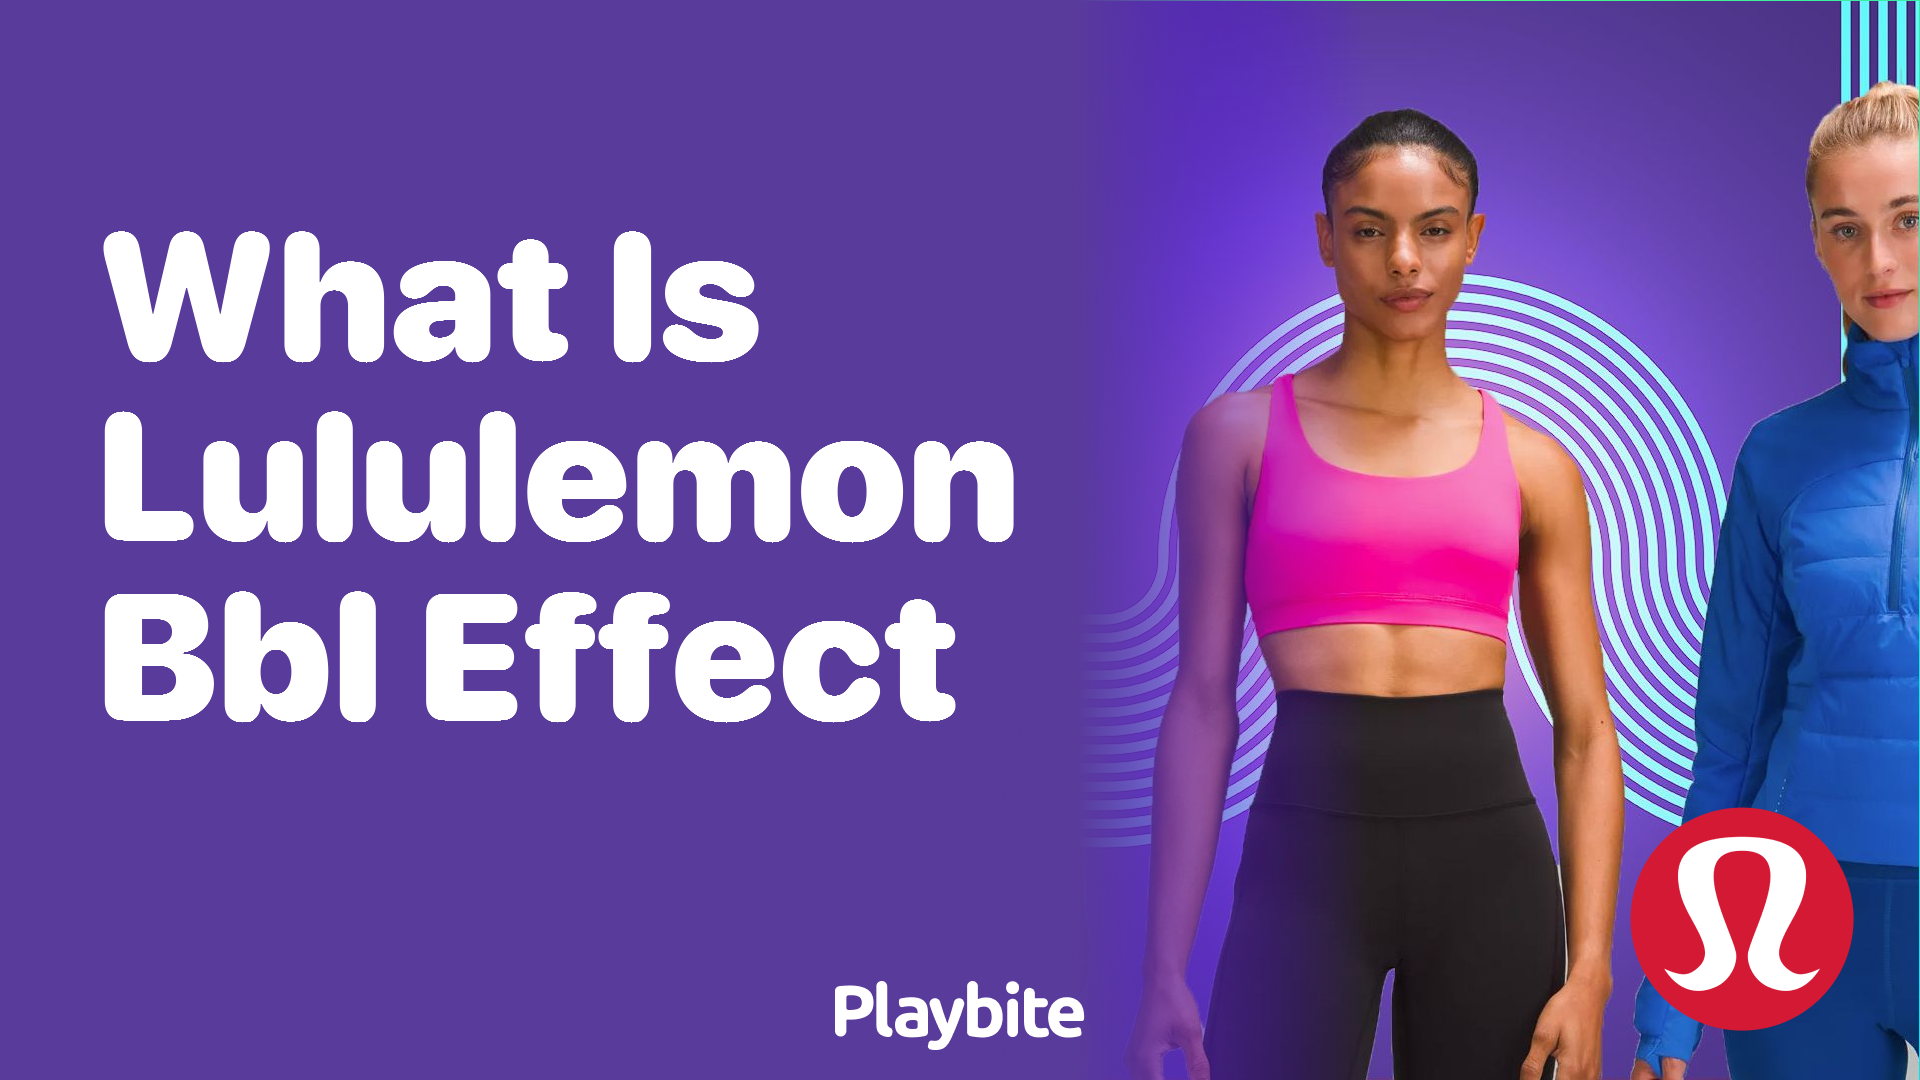 What is the BBL Effect Lululemon Offers? - Playbite